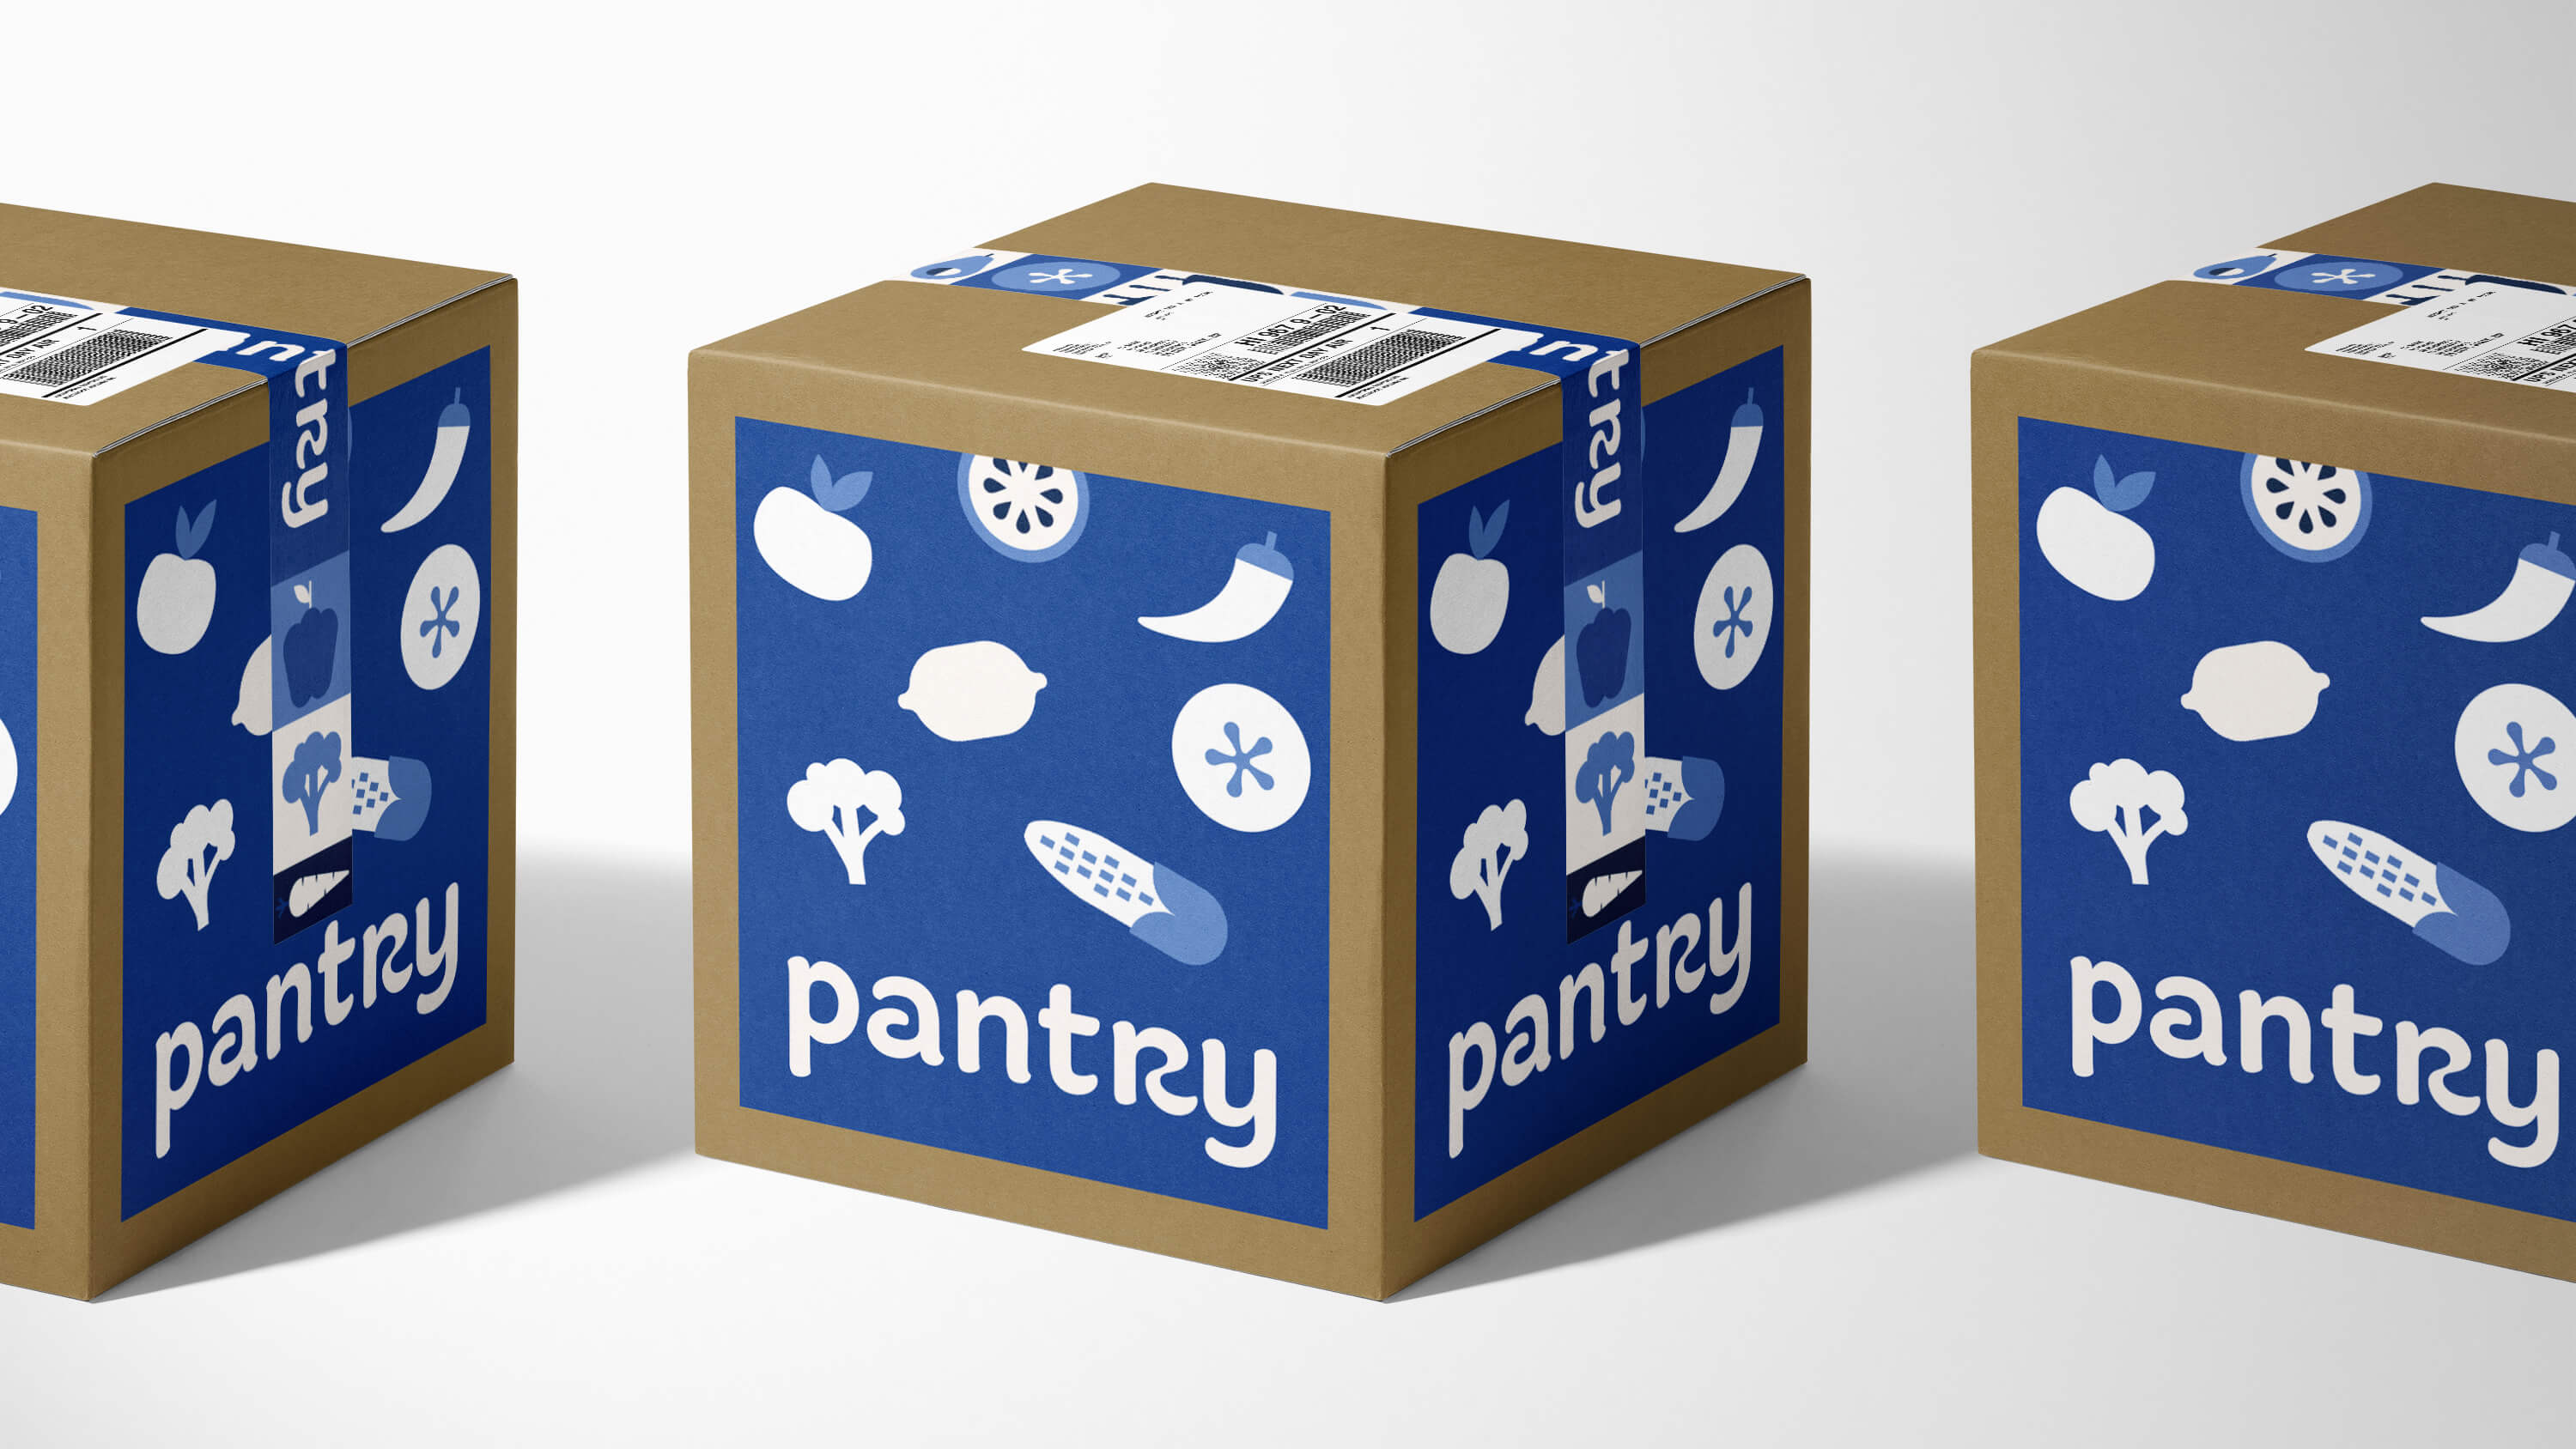 Pantry Subscription-Based Service Branding